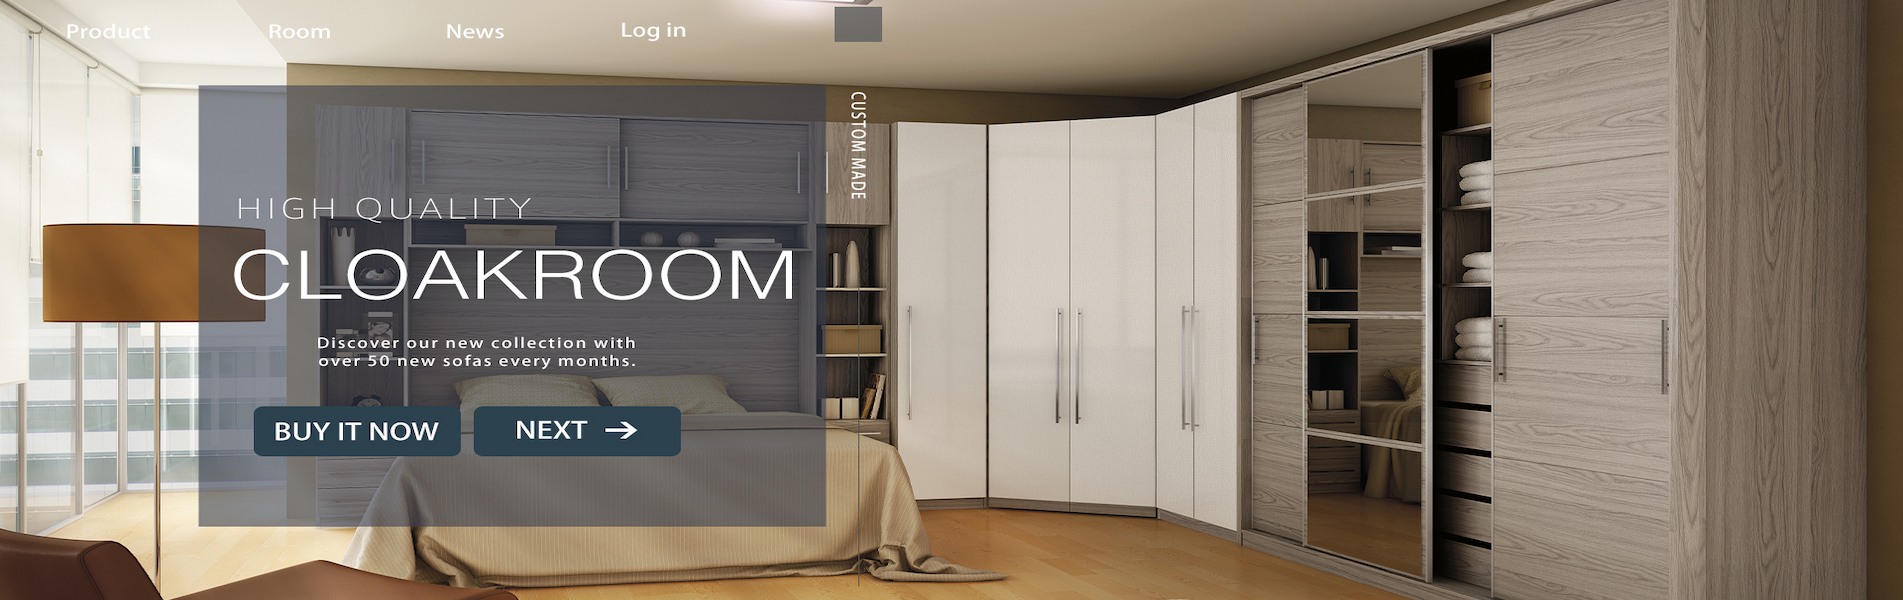 whole house customization manufacturer, kitchen cabinets, wardrobes, bathroom cabinets, laundry rooms.